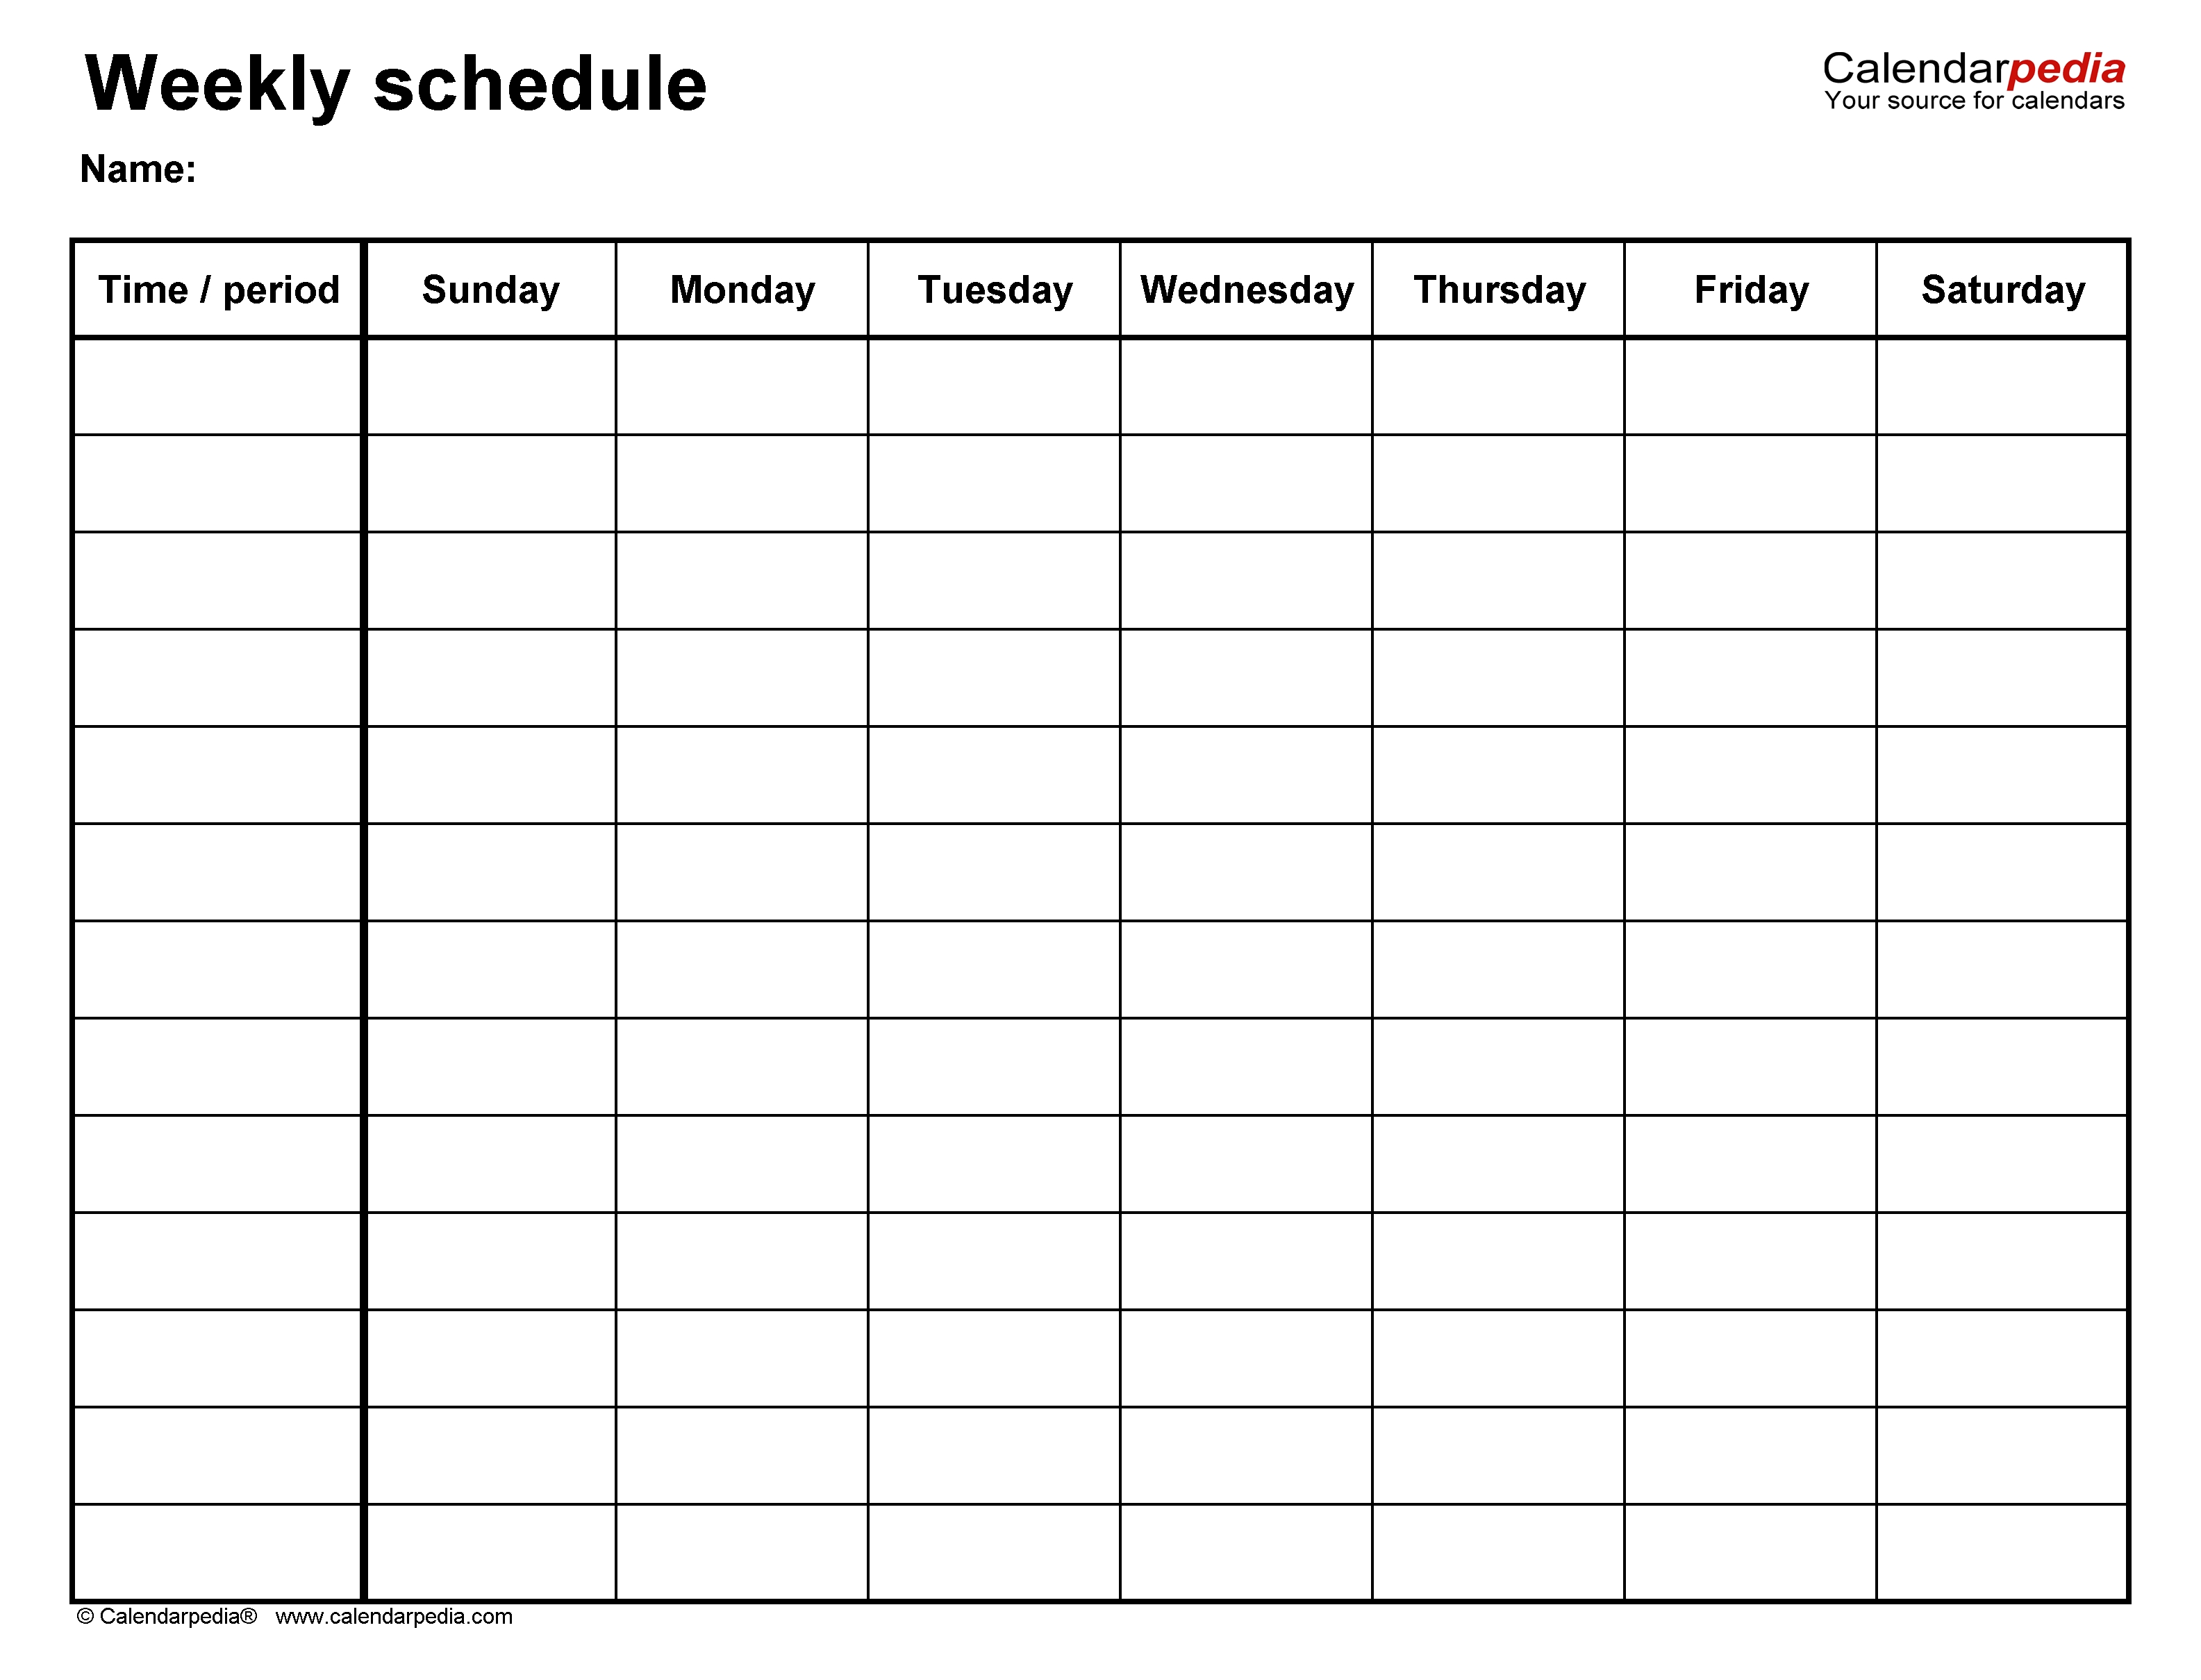 Free Weekly Schedule Templates For Word - 18 Templates-Weekly Hourly Template May Through September 2020